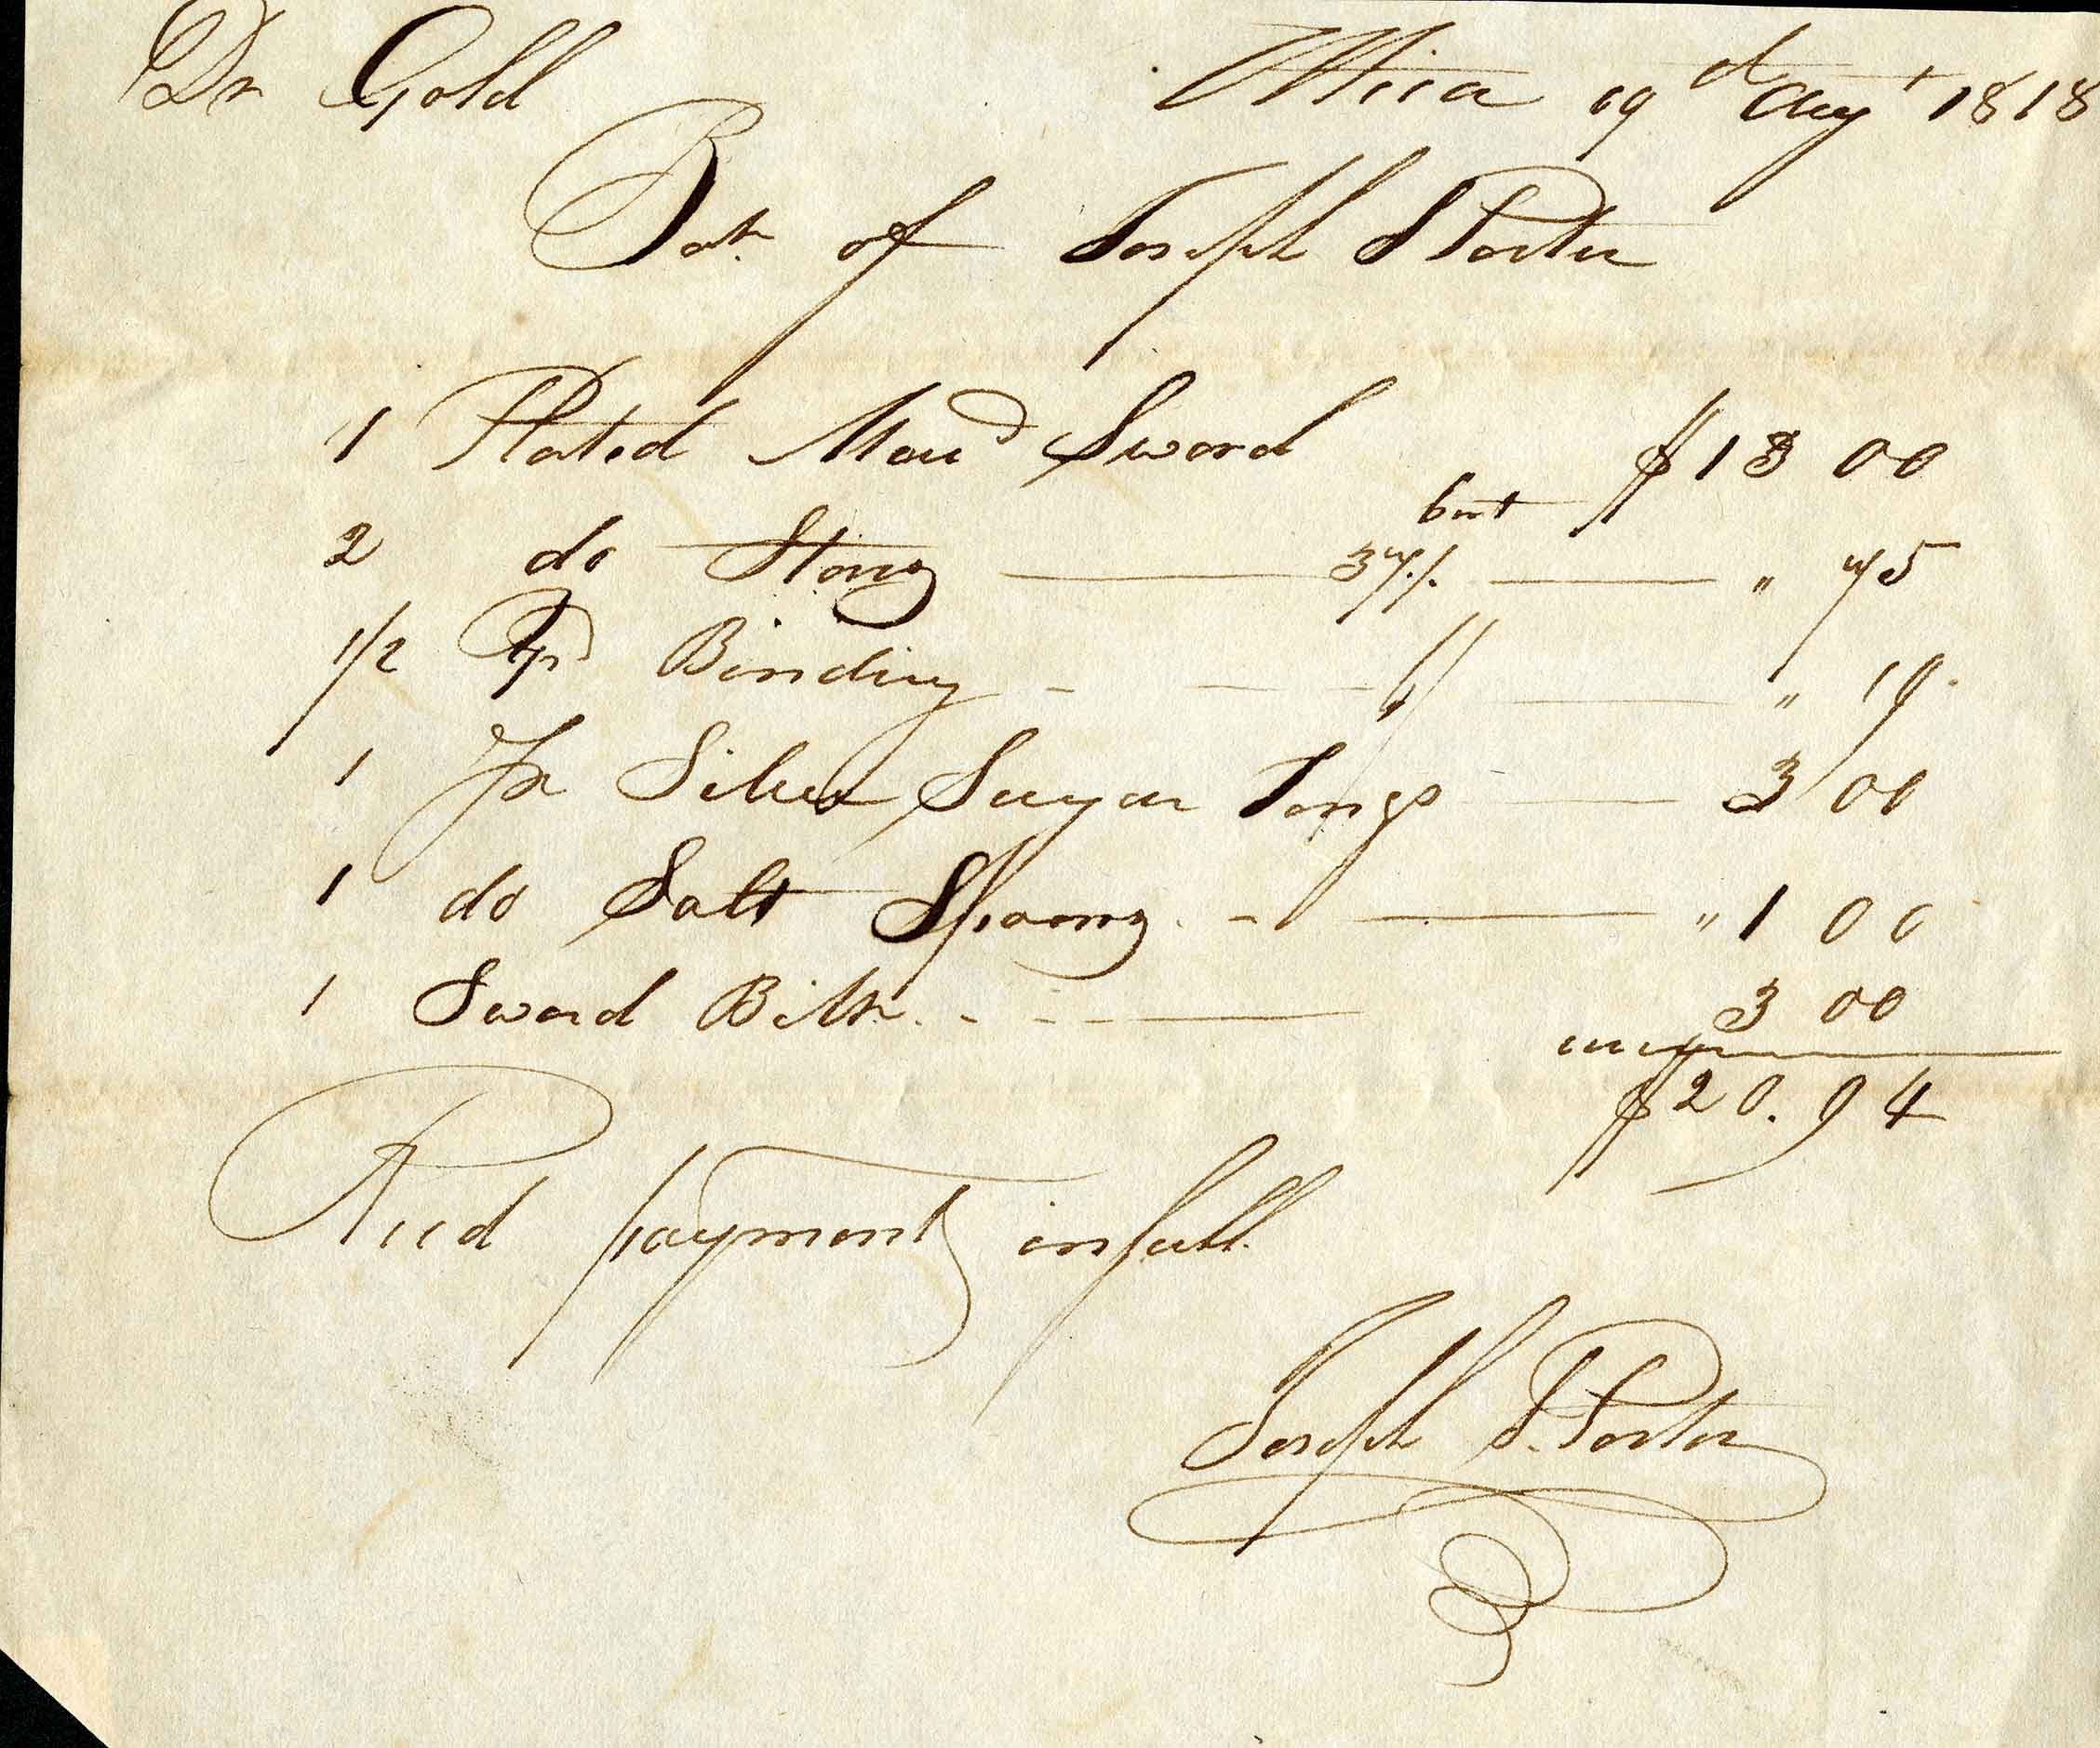 Bank receipt from 1818. From the T.S. Gold Family Papers